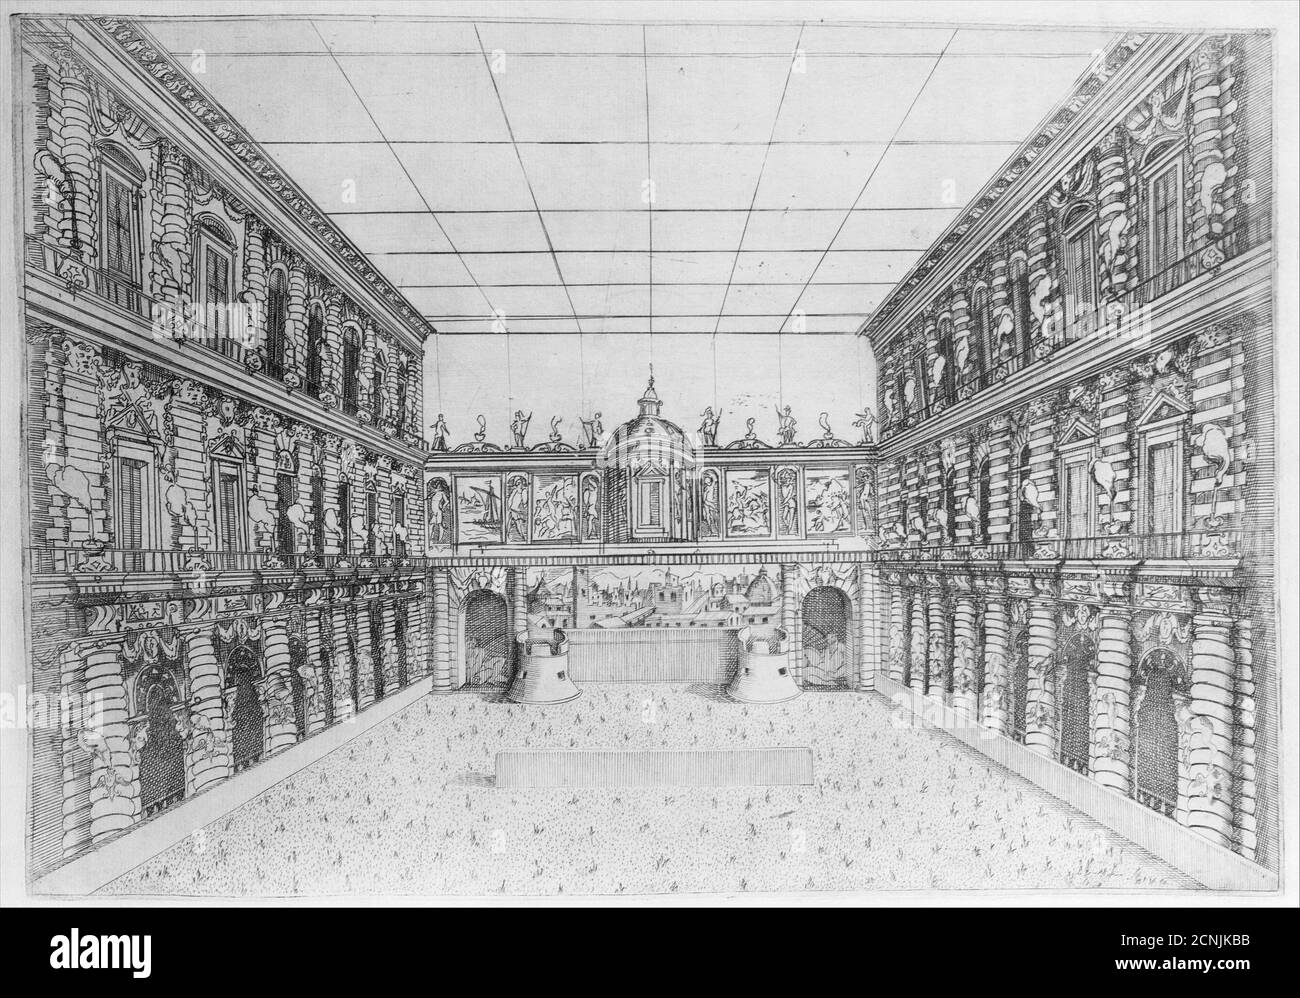 Court of Palazzo Pitti decorated with Candelabra, from an Album with Plates Documenting the Festivities of the 1589 Wedding of Ferdinand I and Christine of Lorraine, 1589-1592. Stock Photo